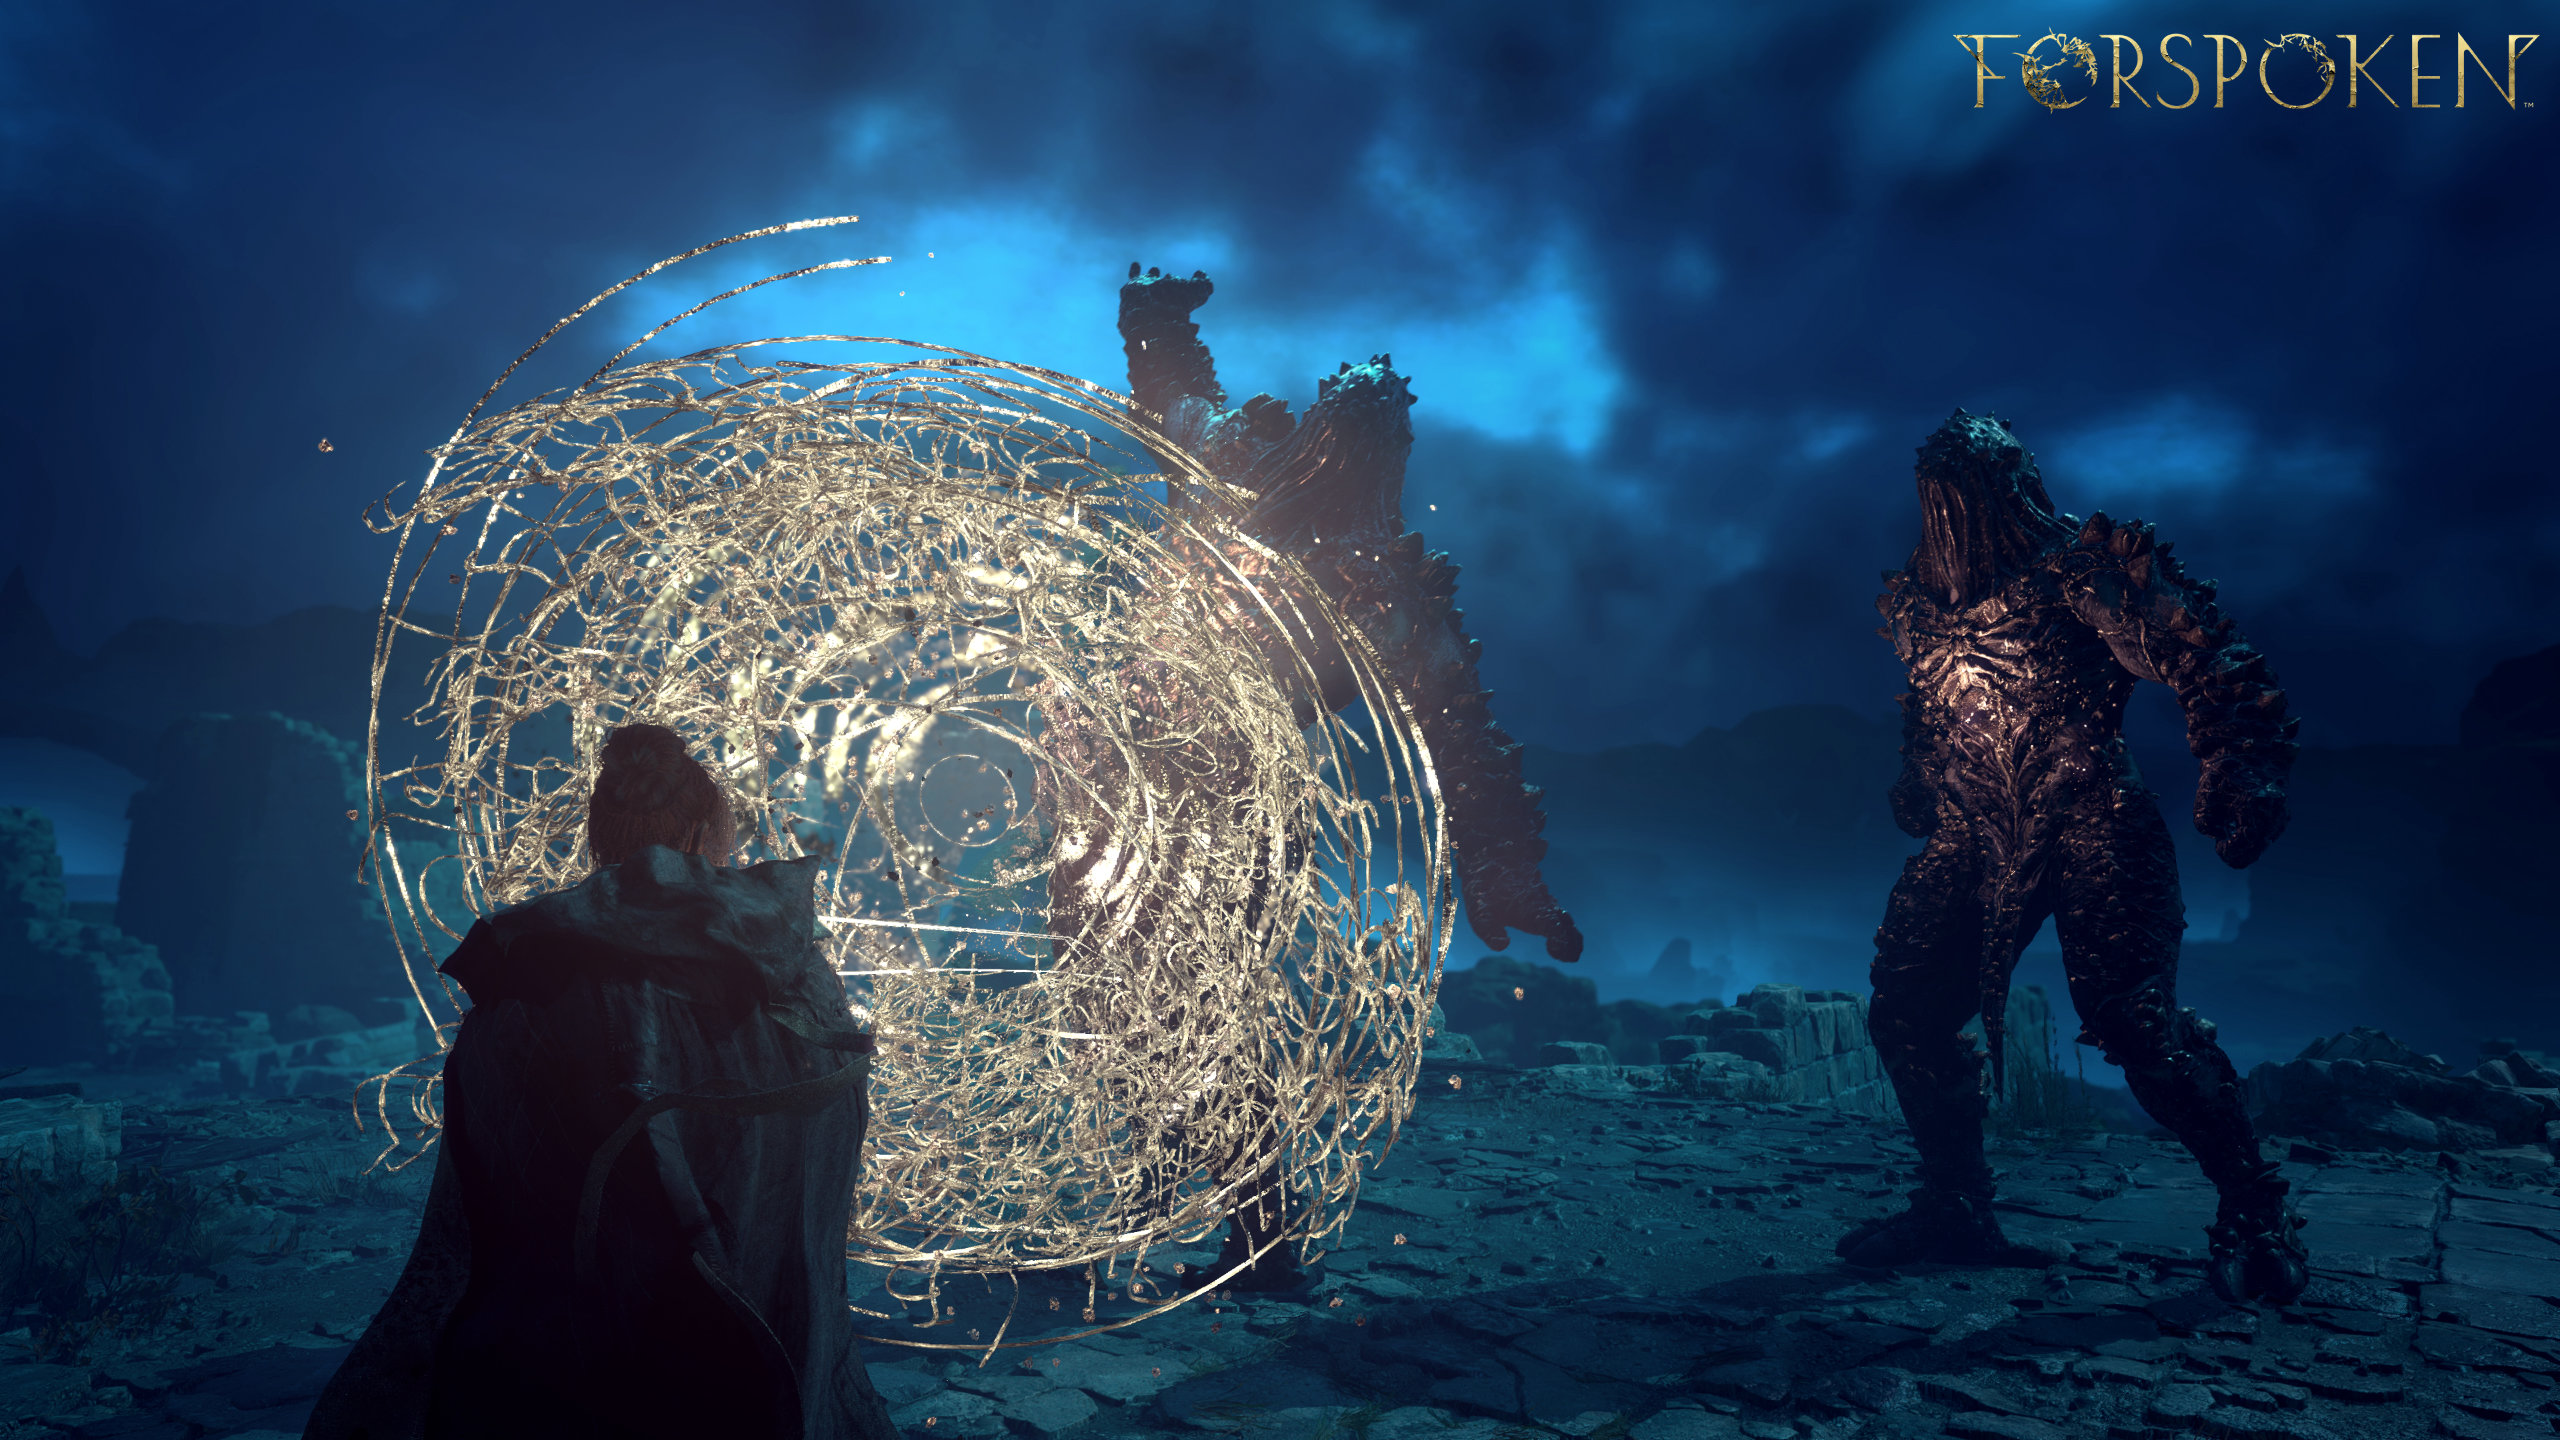 Forspoken Screenshot of a woman creating a round magical barrier as protection from two lumbering sludge beasts.